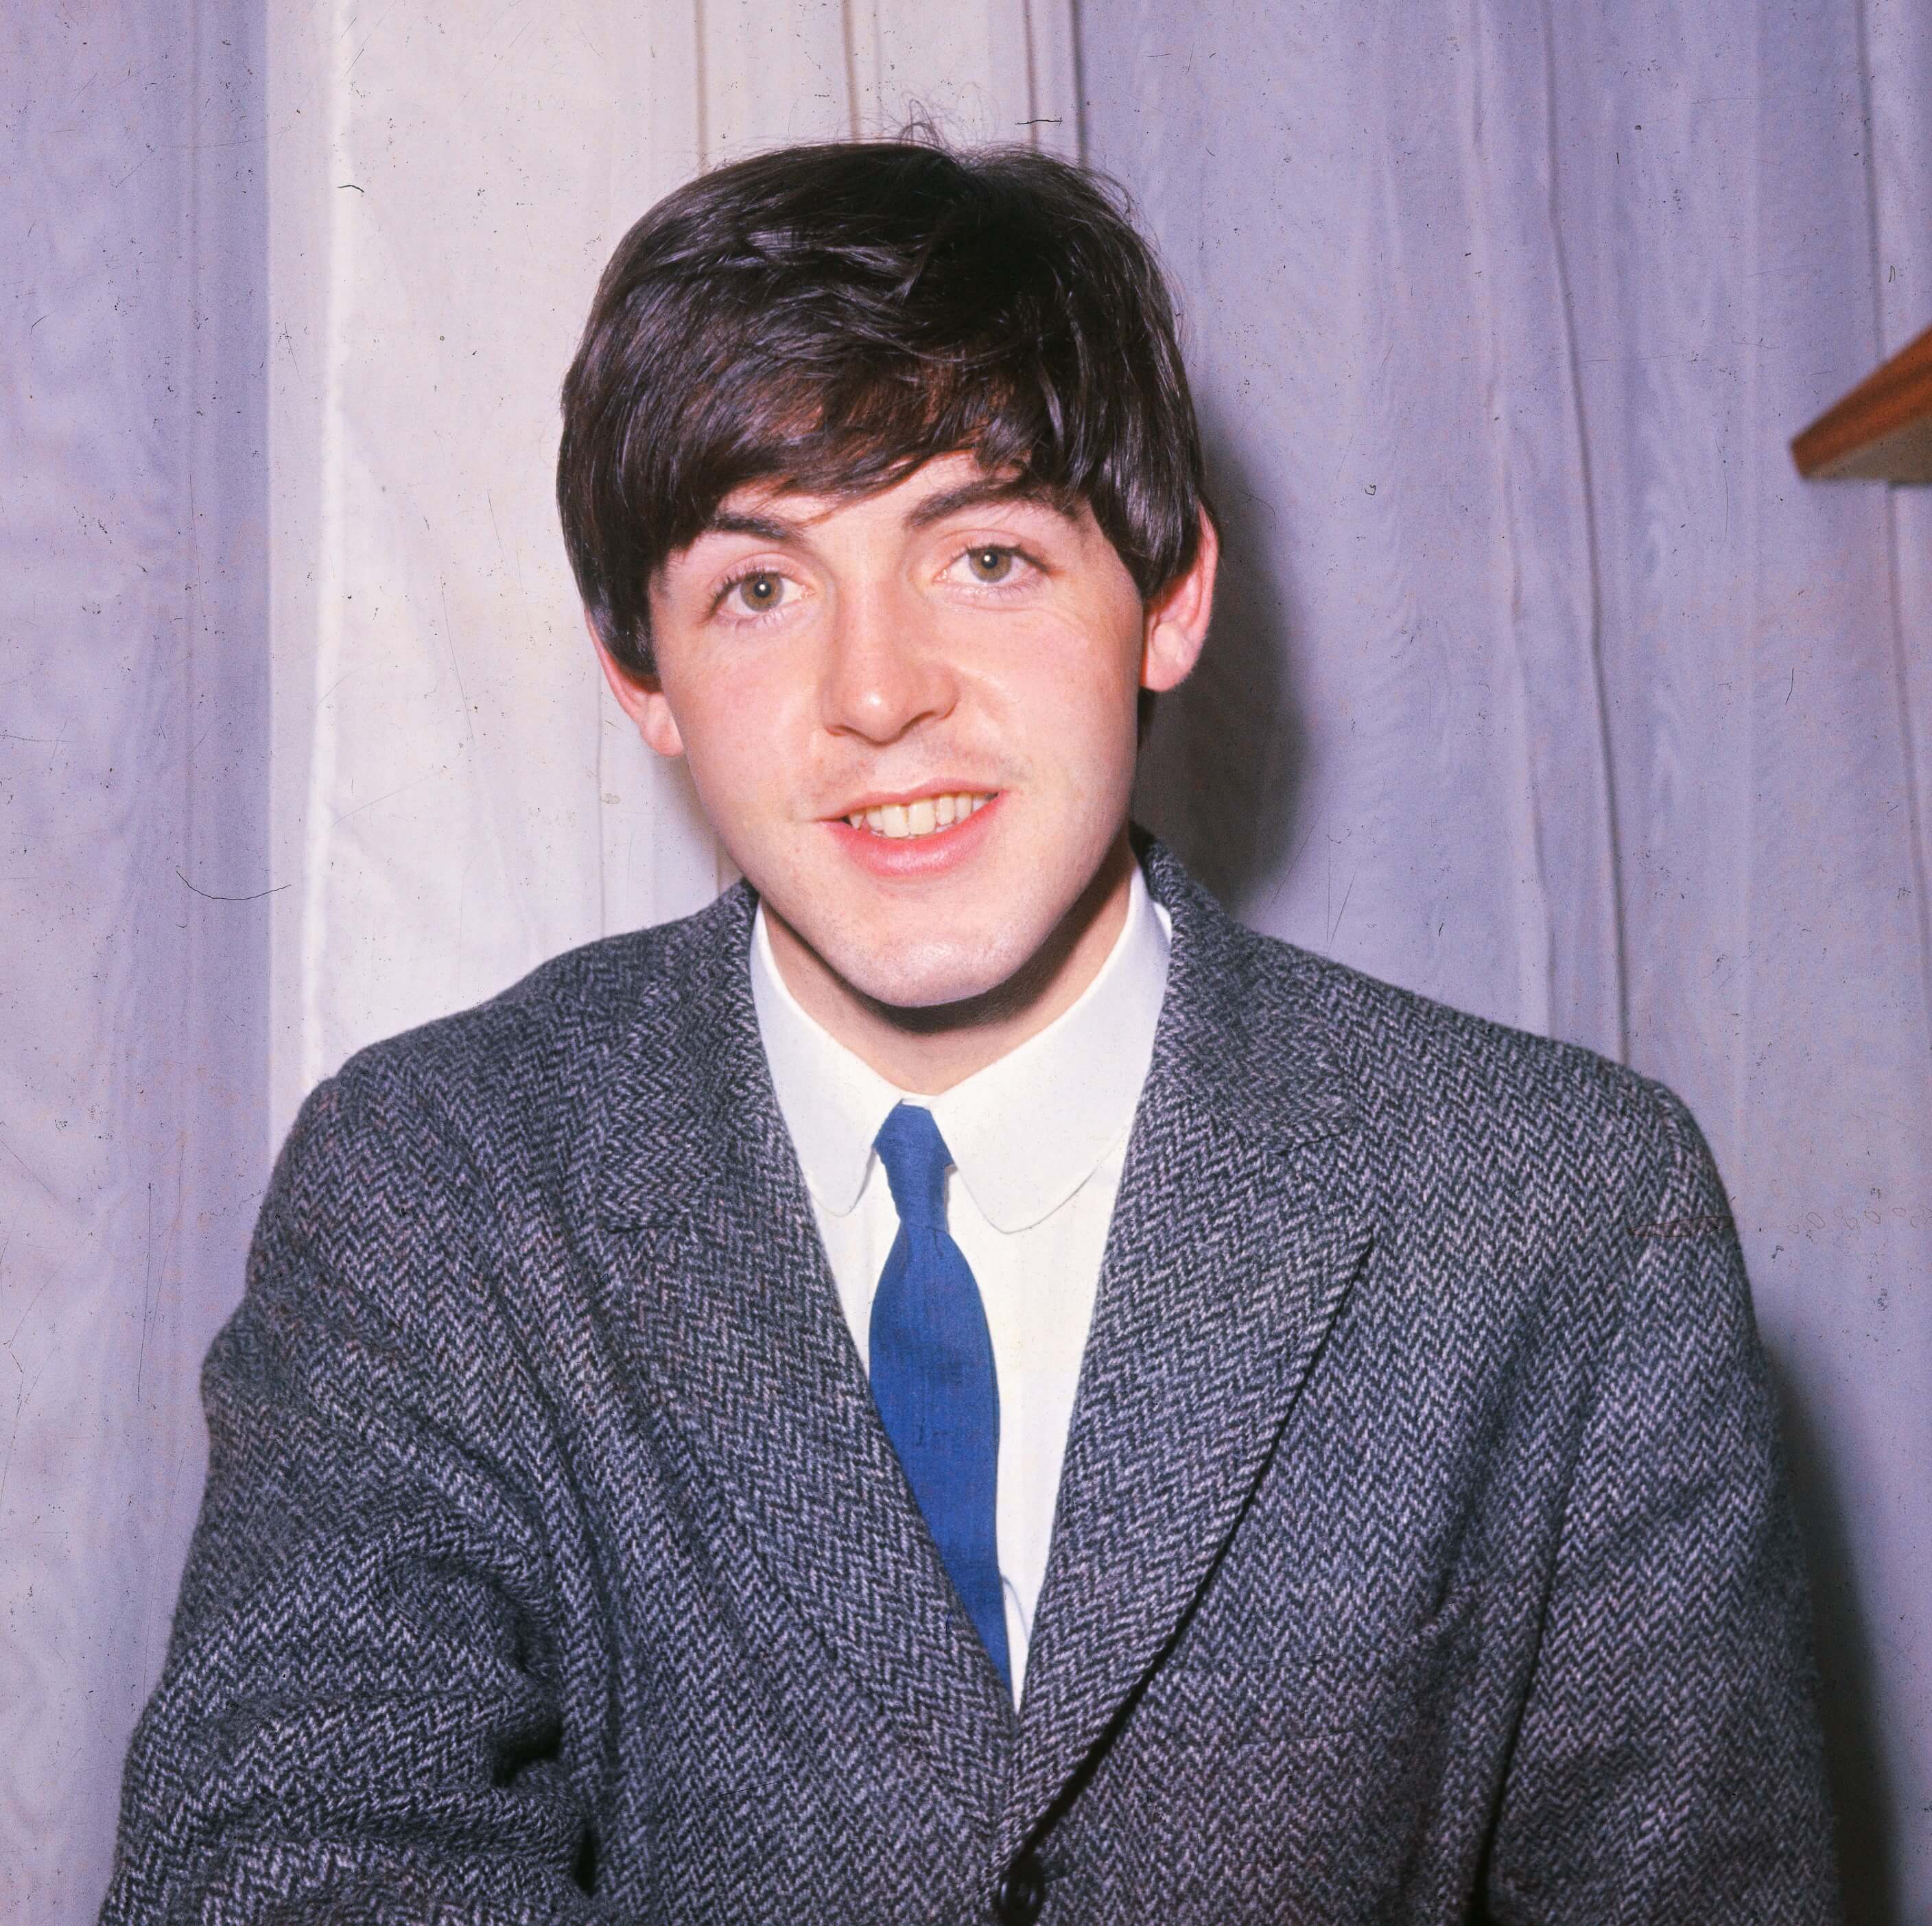 The Beatles' Paul McCartney in front of a curtain